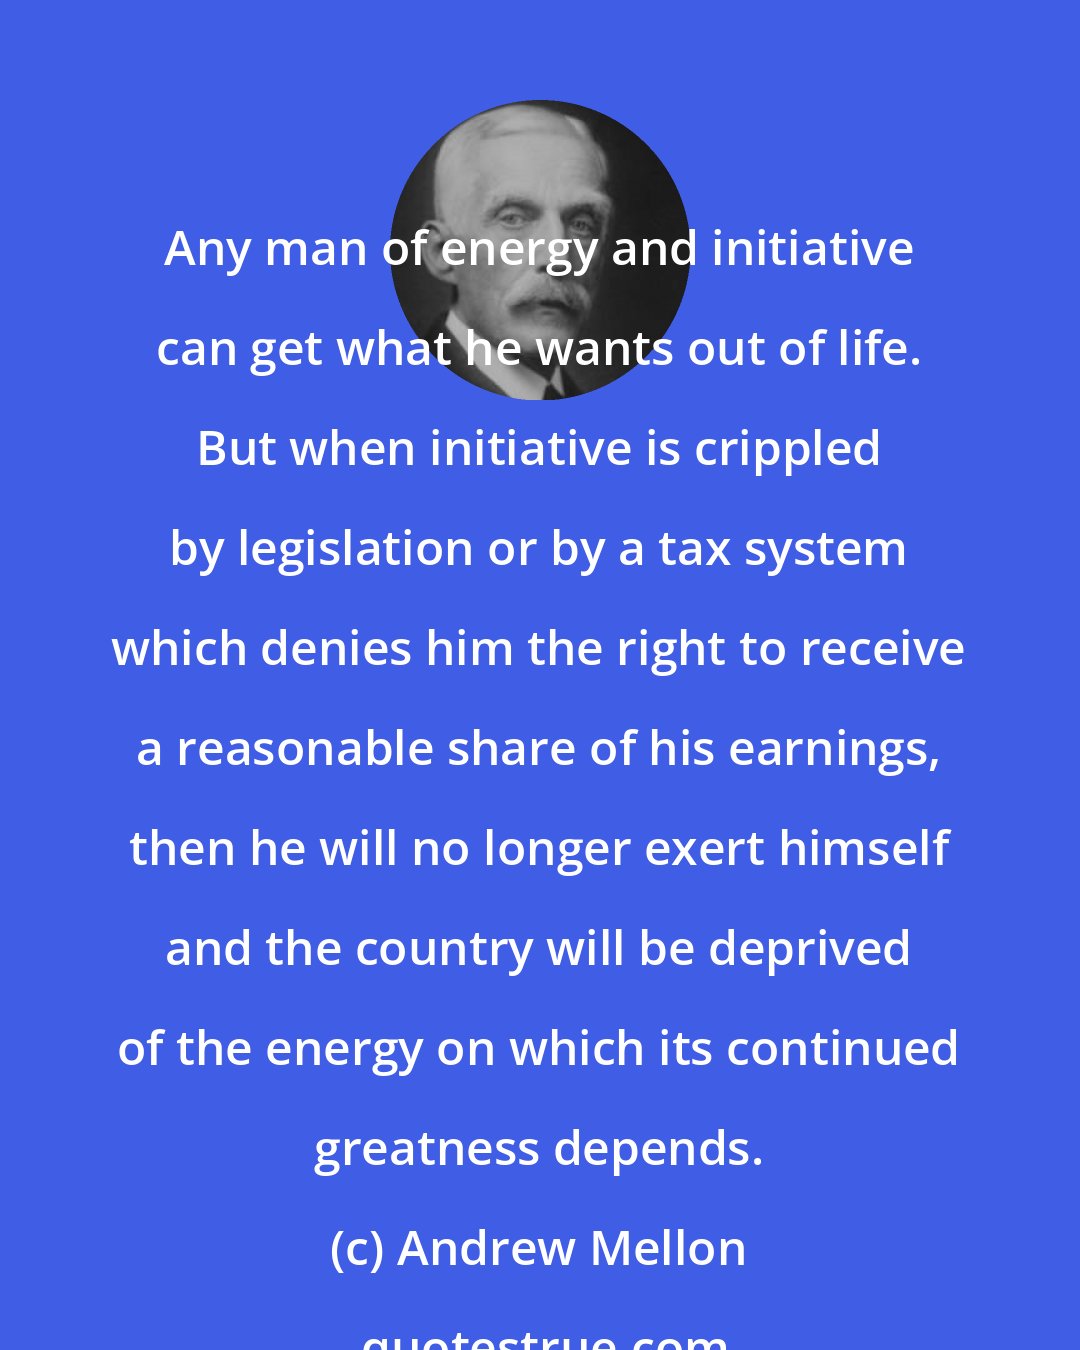 Andrew Mellon: Any man of energy and initiative can get what he wants out of life. But when initiative is crippled by legislation or by a tax system which denies him the right to receive a reasonable share of his earnings, then he will no longer exert himself and the country will be deprived of the energy on which its continued greatness depends.